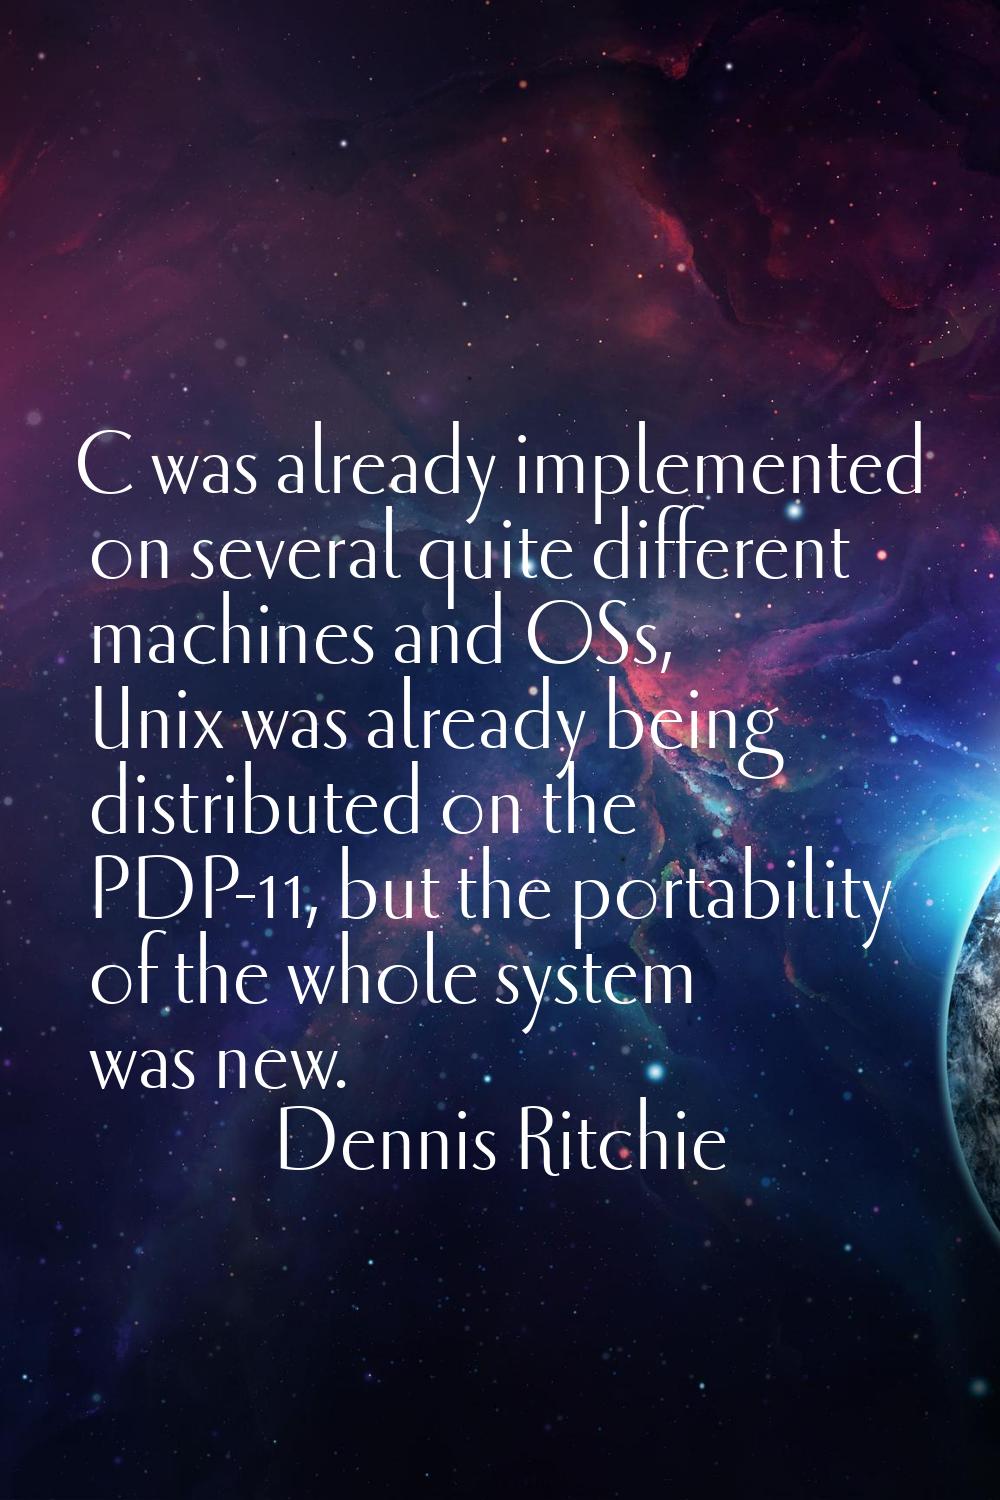 C was already implemented on several quite different machines and OSs, Unix was already being distr